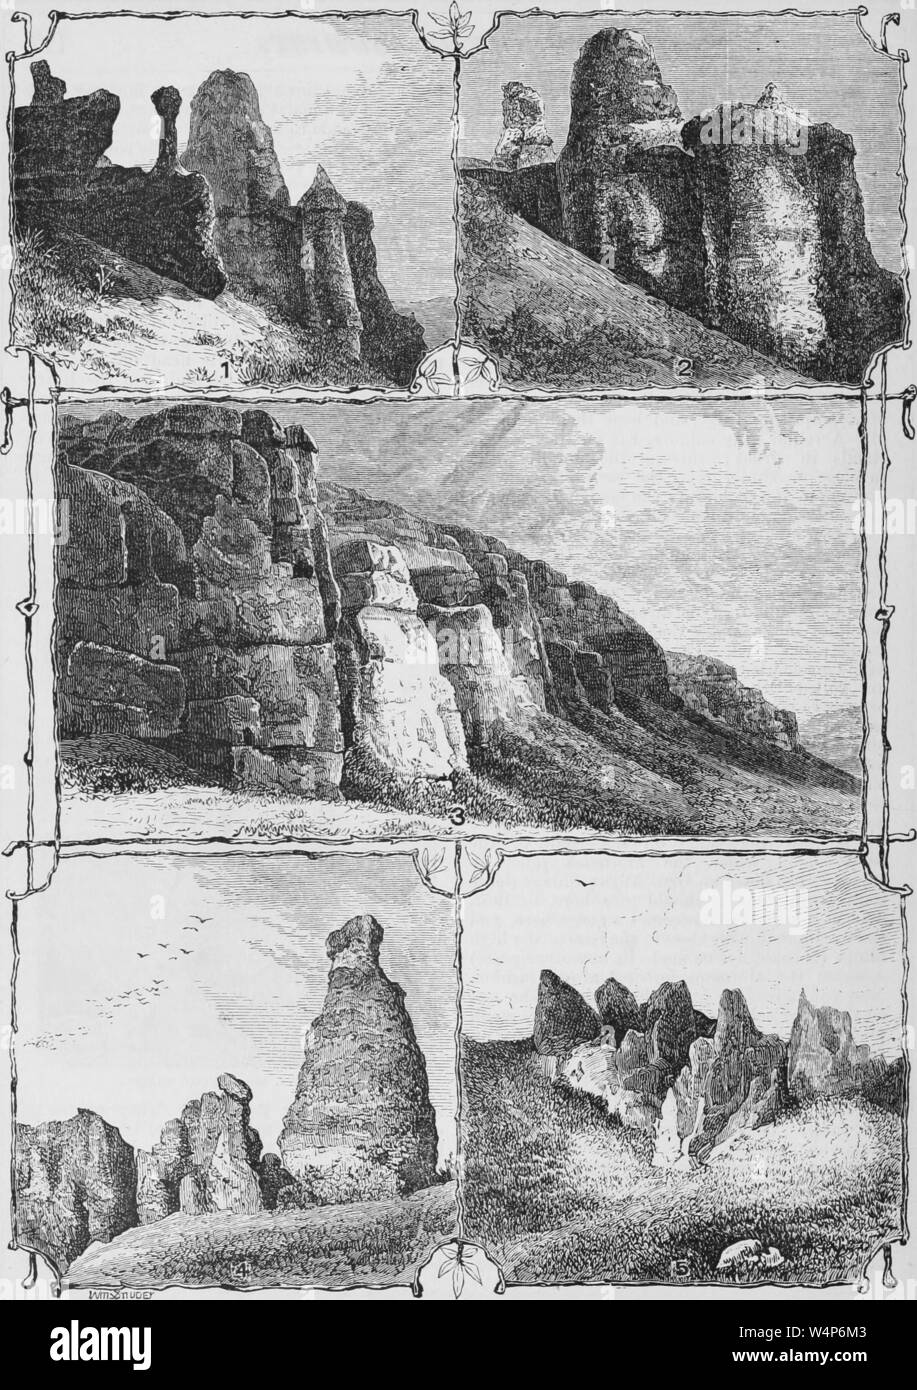 Engravings of the rock scenes near Echo City, Witches Rocks, Battlement Rocks, Egyptian Tombs, Witches Bottles, and Needle Rocks, from the book 'The Pacific tourist' by Henry T. Williams, 1878. Courtesy Internet Archive. () Stock Photo